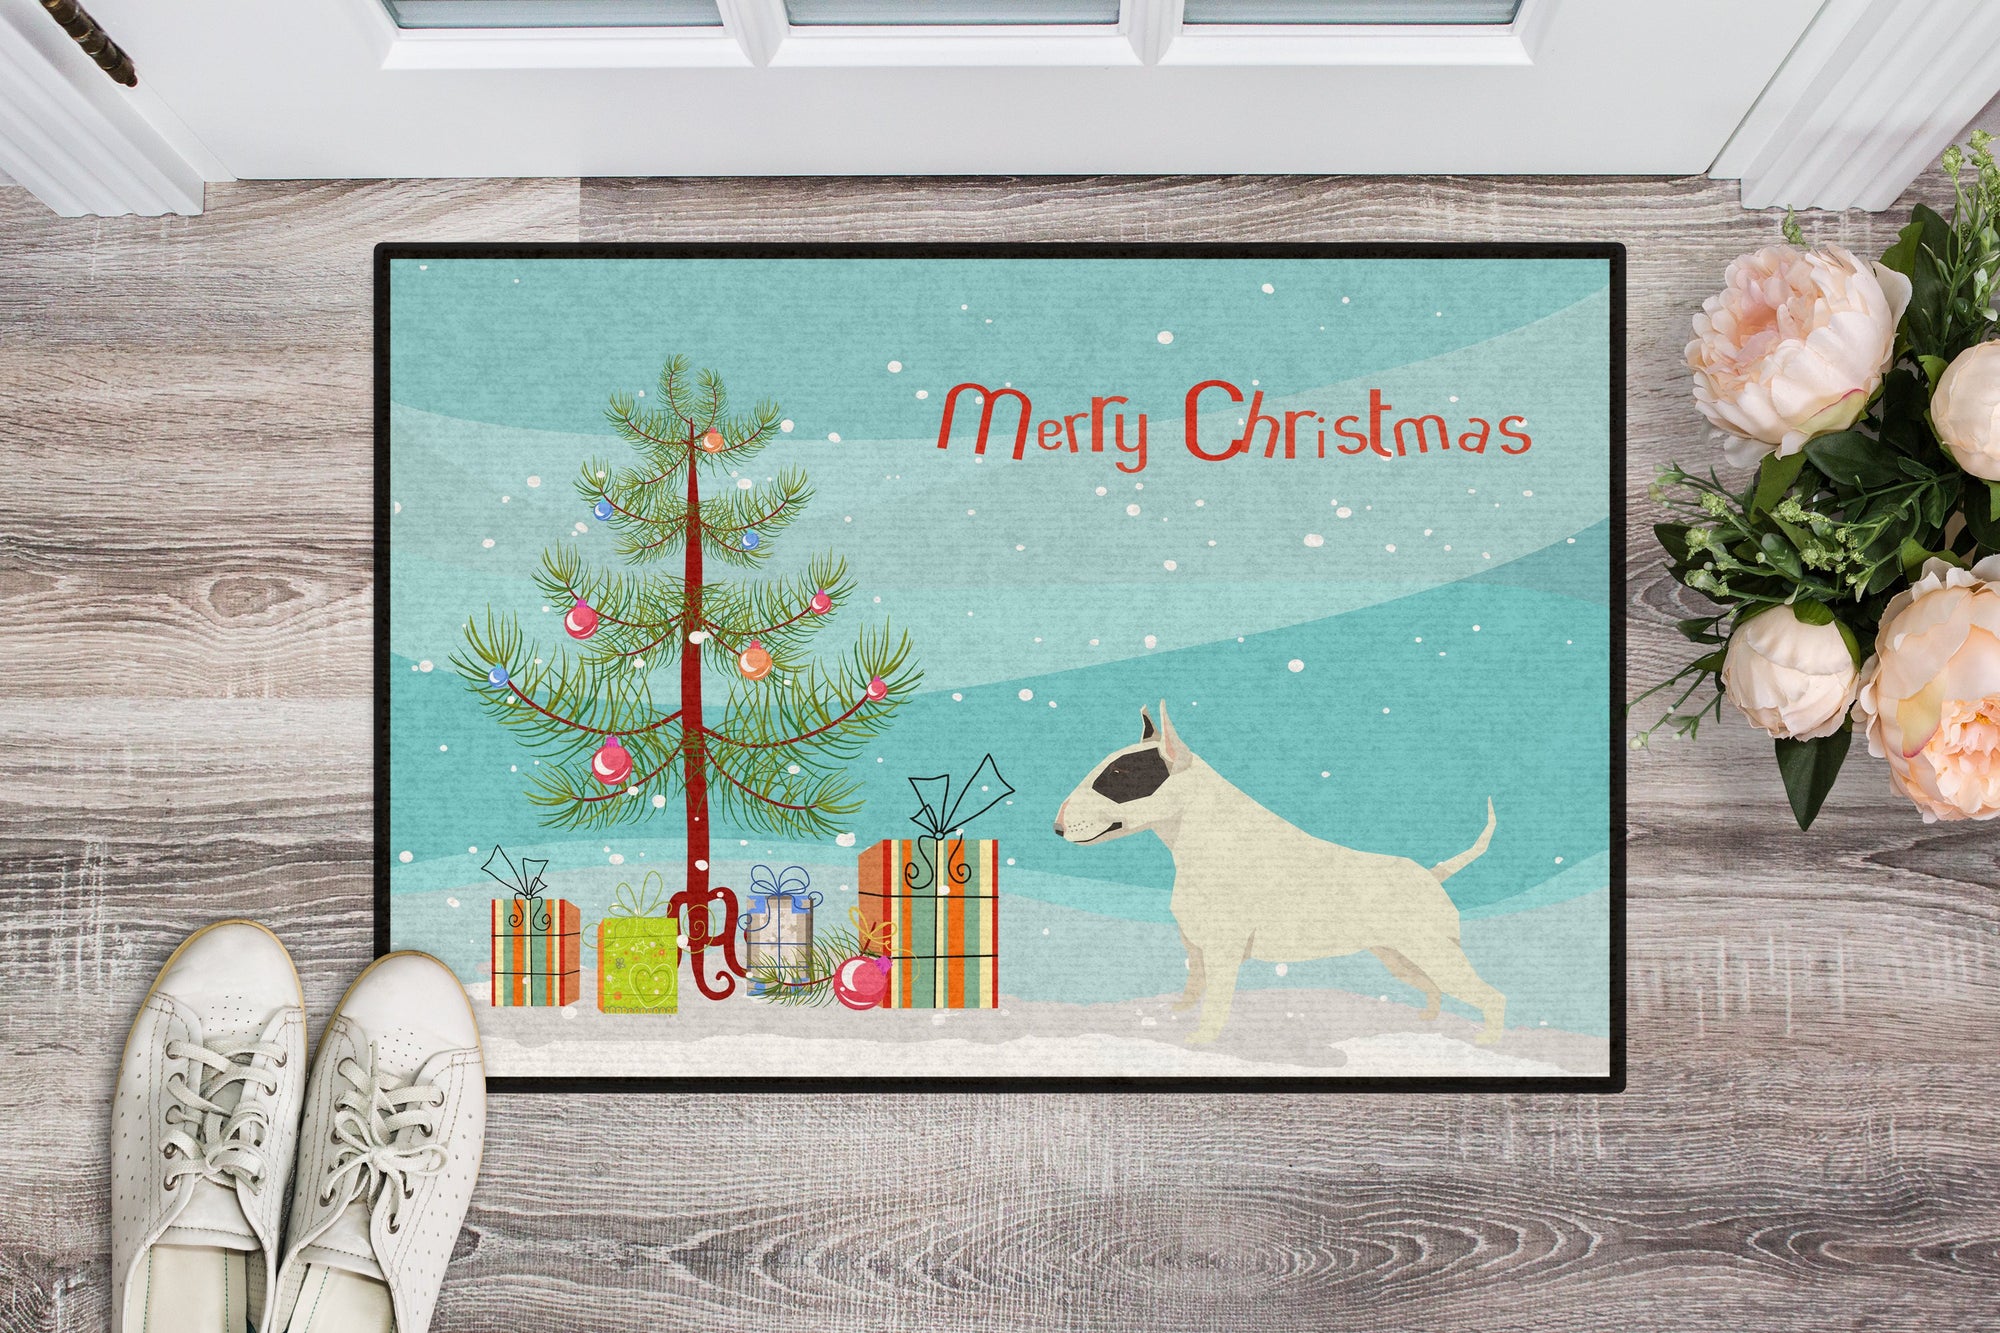 Black and White Bull Terrier Christmas Tree Indoor or Outdoor Mat 24x36 CK3527JMAT by Caroline's Treasures